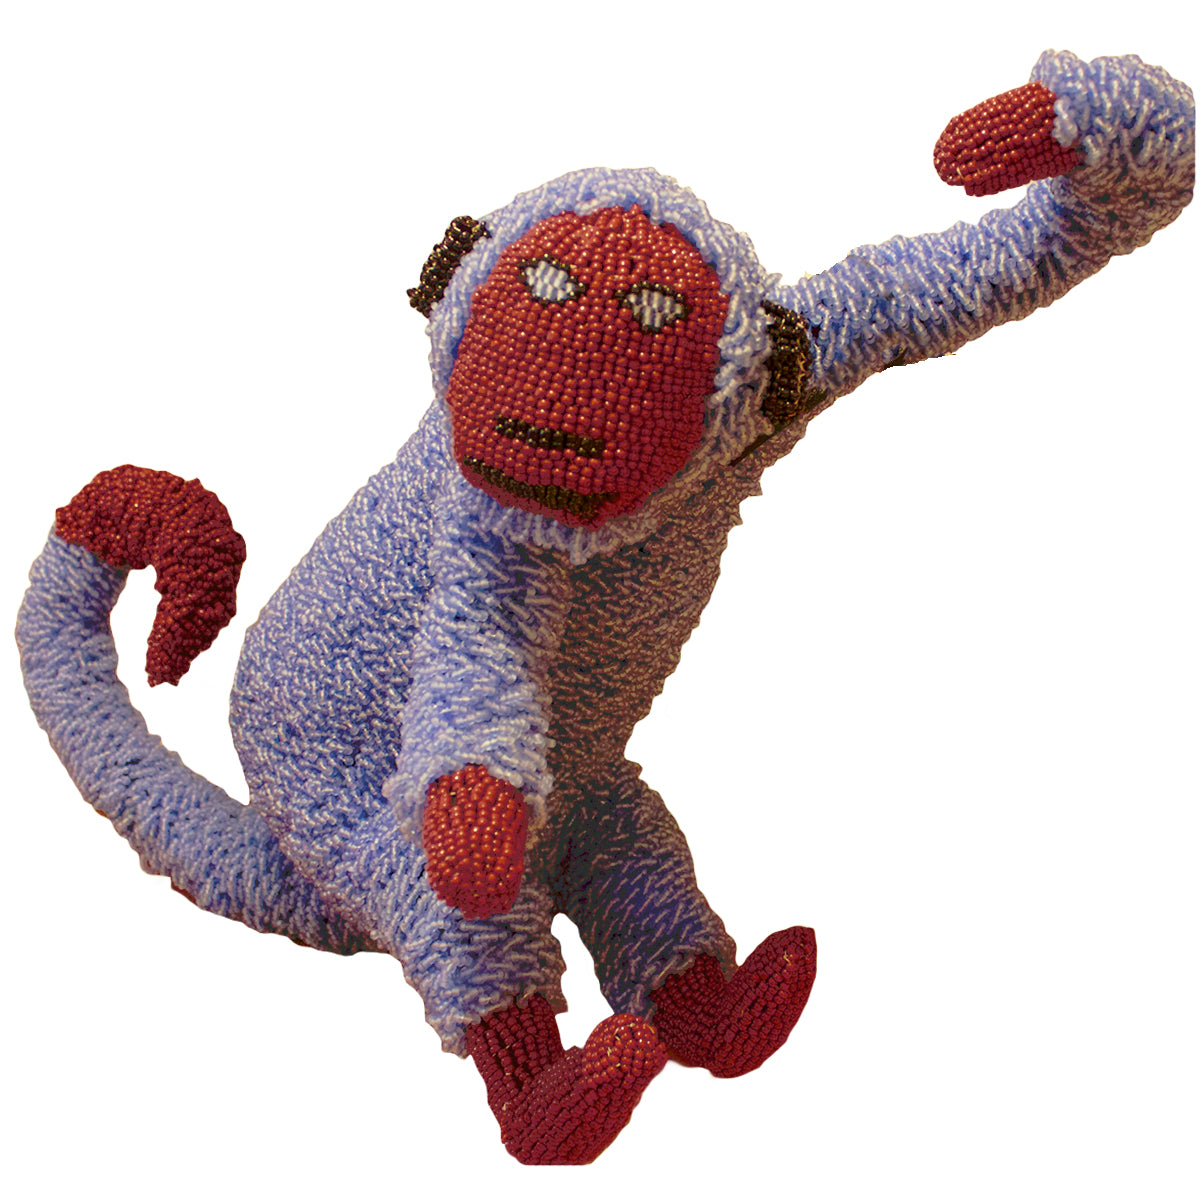 Beaded blue monkey handcrafted by female artisans in Africa. These joyful sculptures add whimsy and colour to any room. 